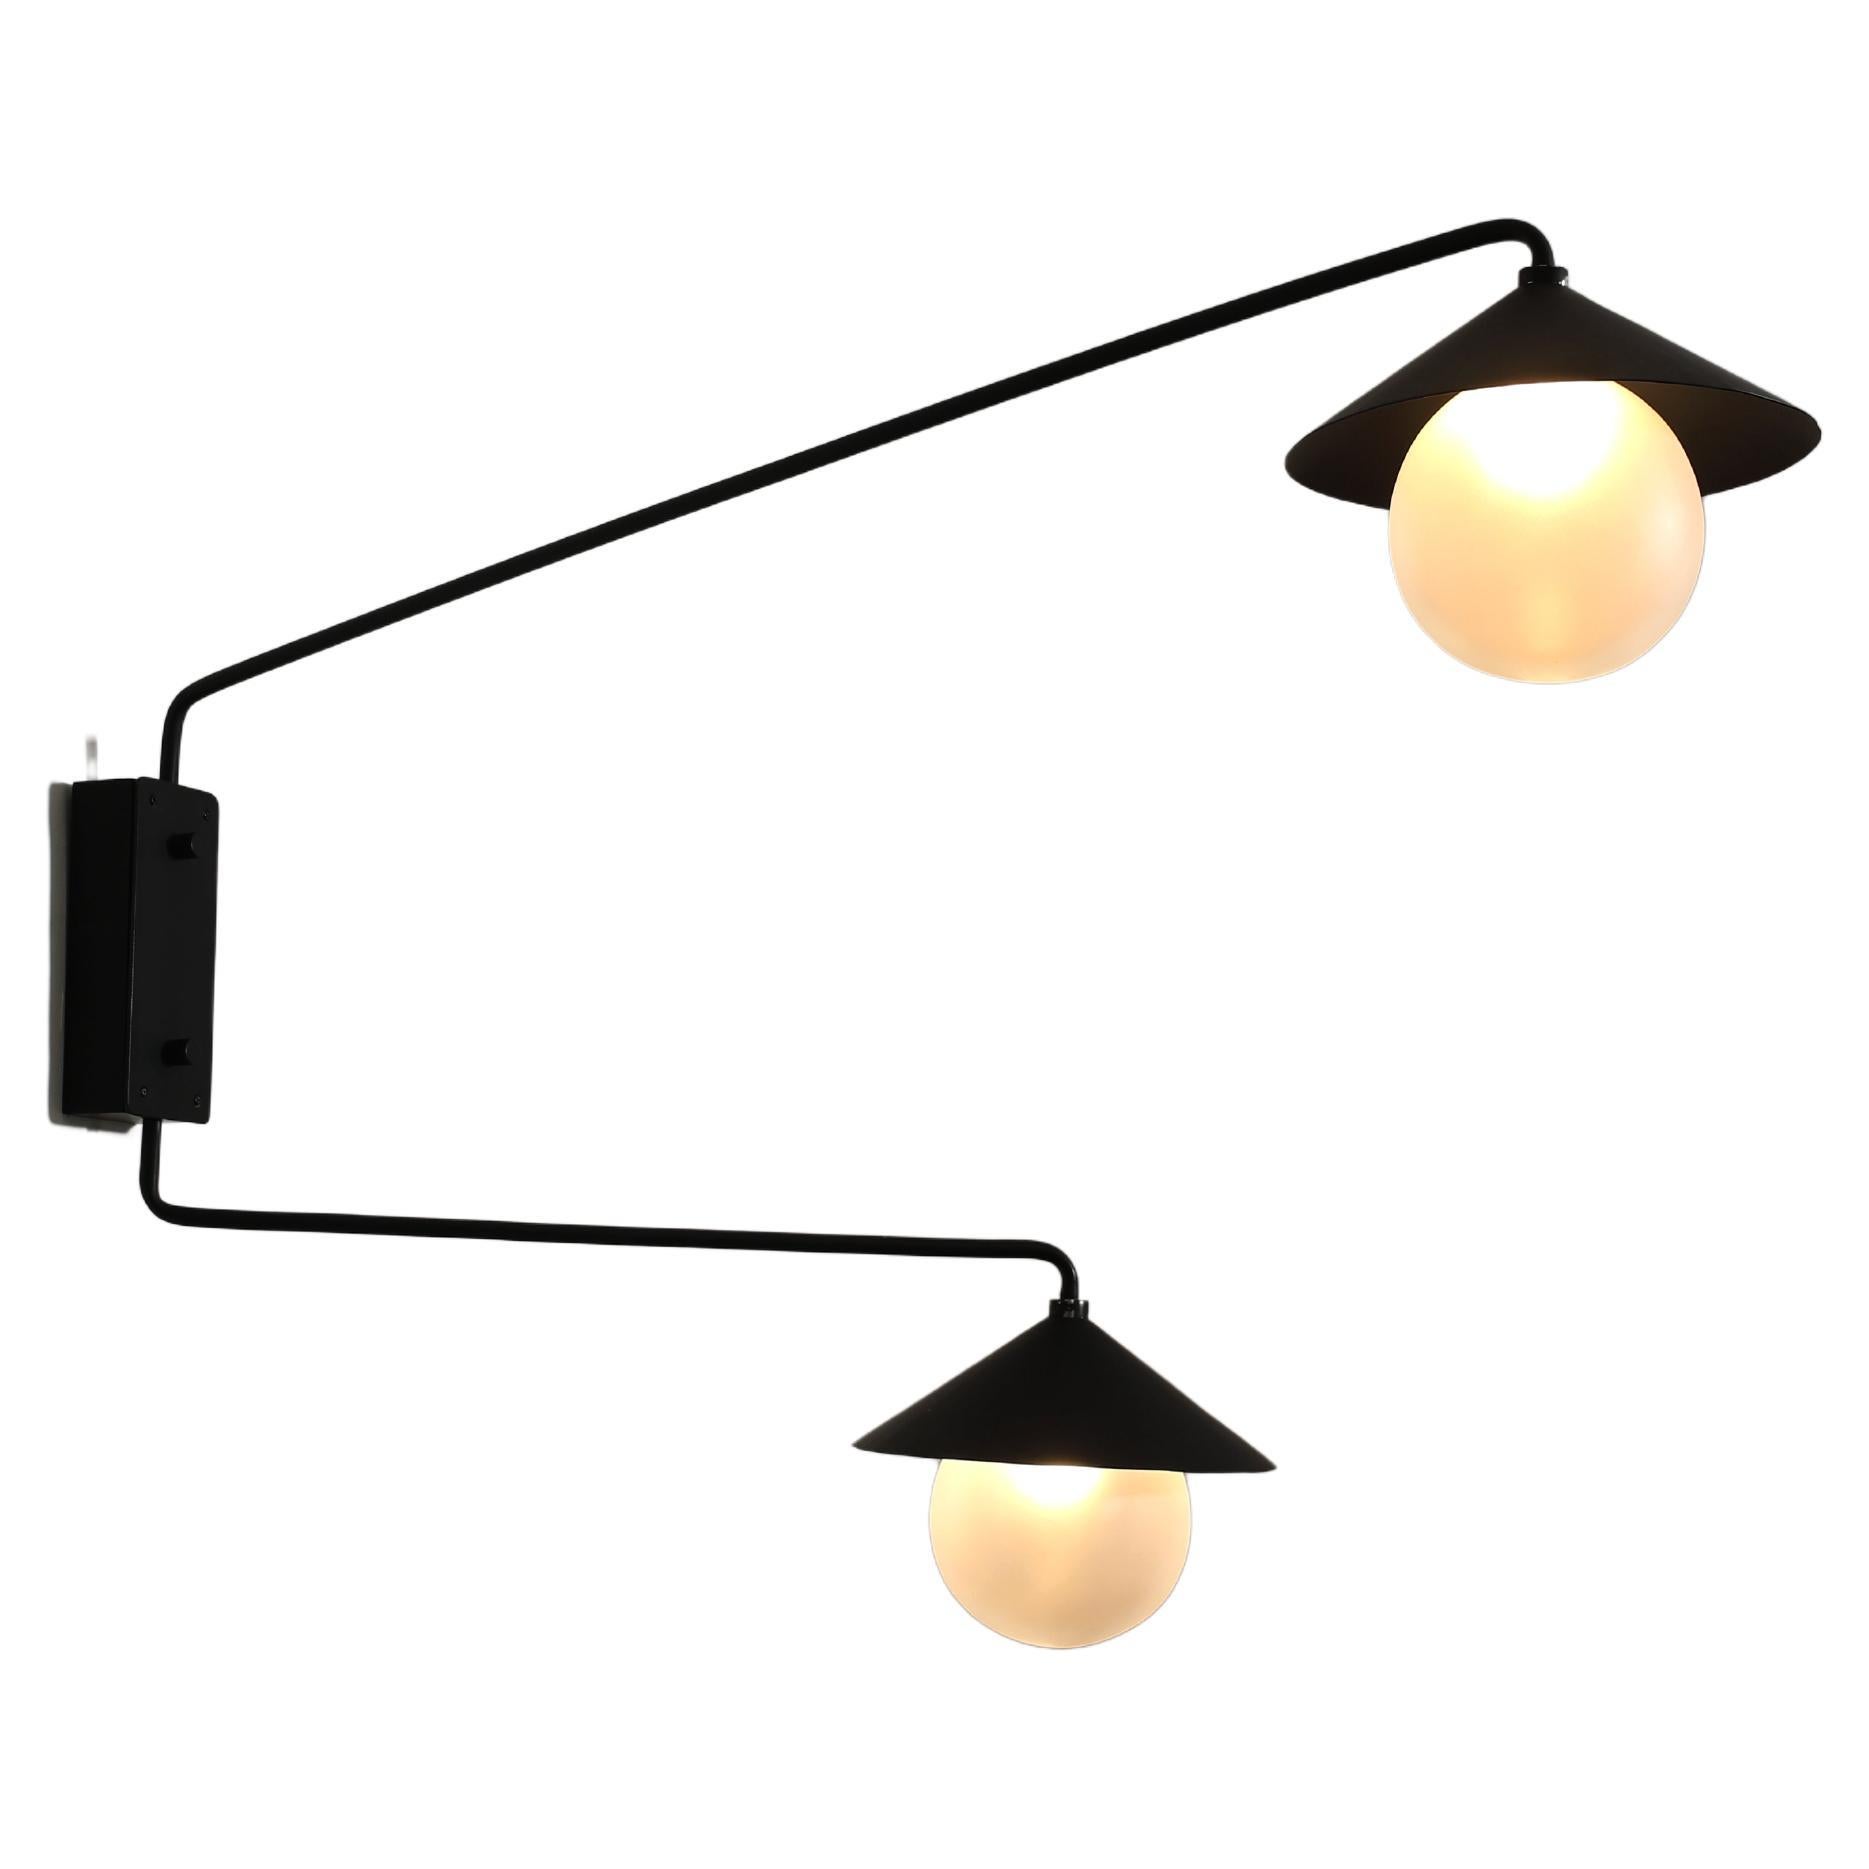 Klove Studio's Two Arm Hut Wall Light For Sale